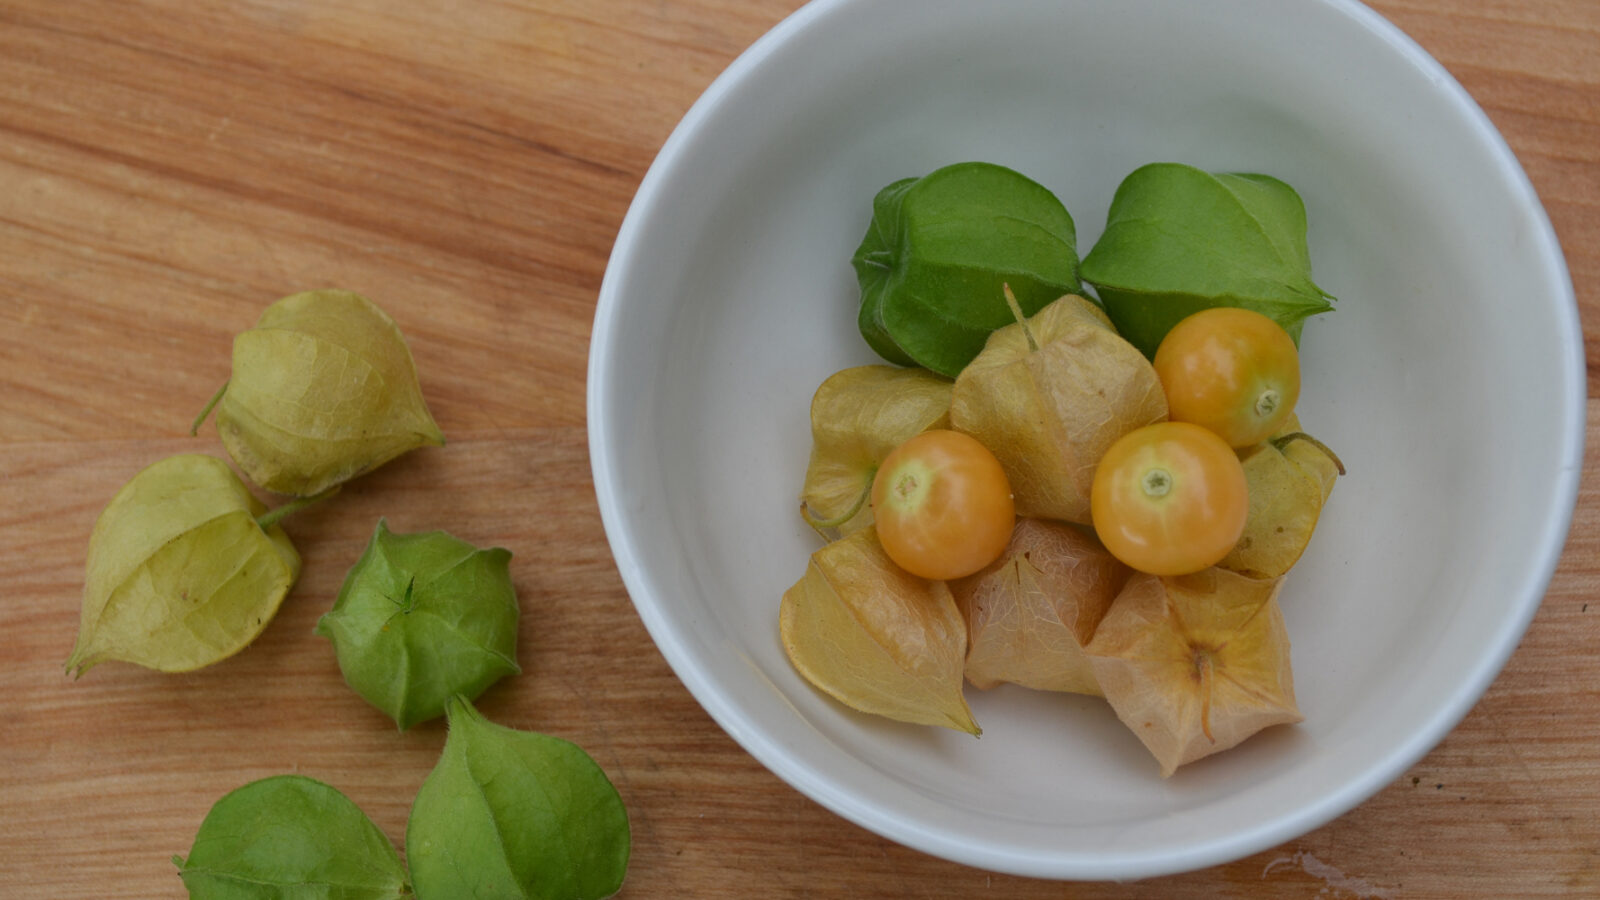 green and yellow ground cherries in a white bowl and on a wooden surface